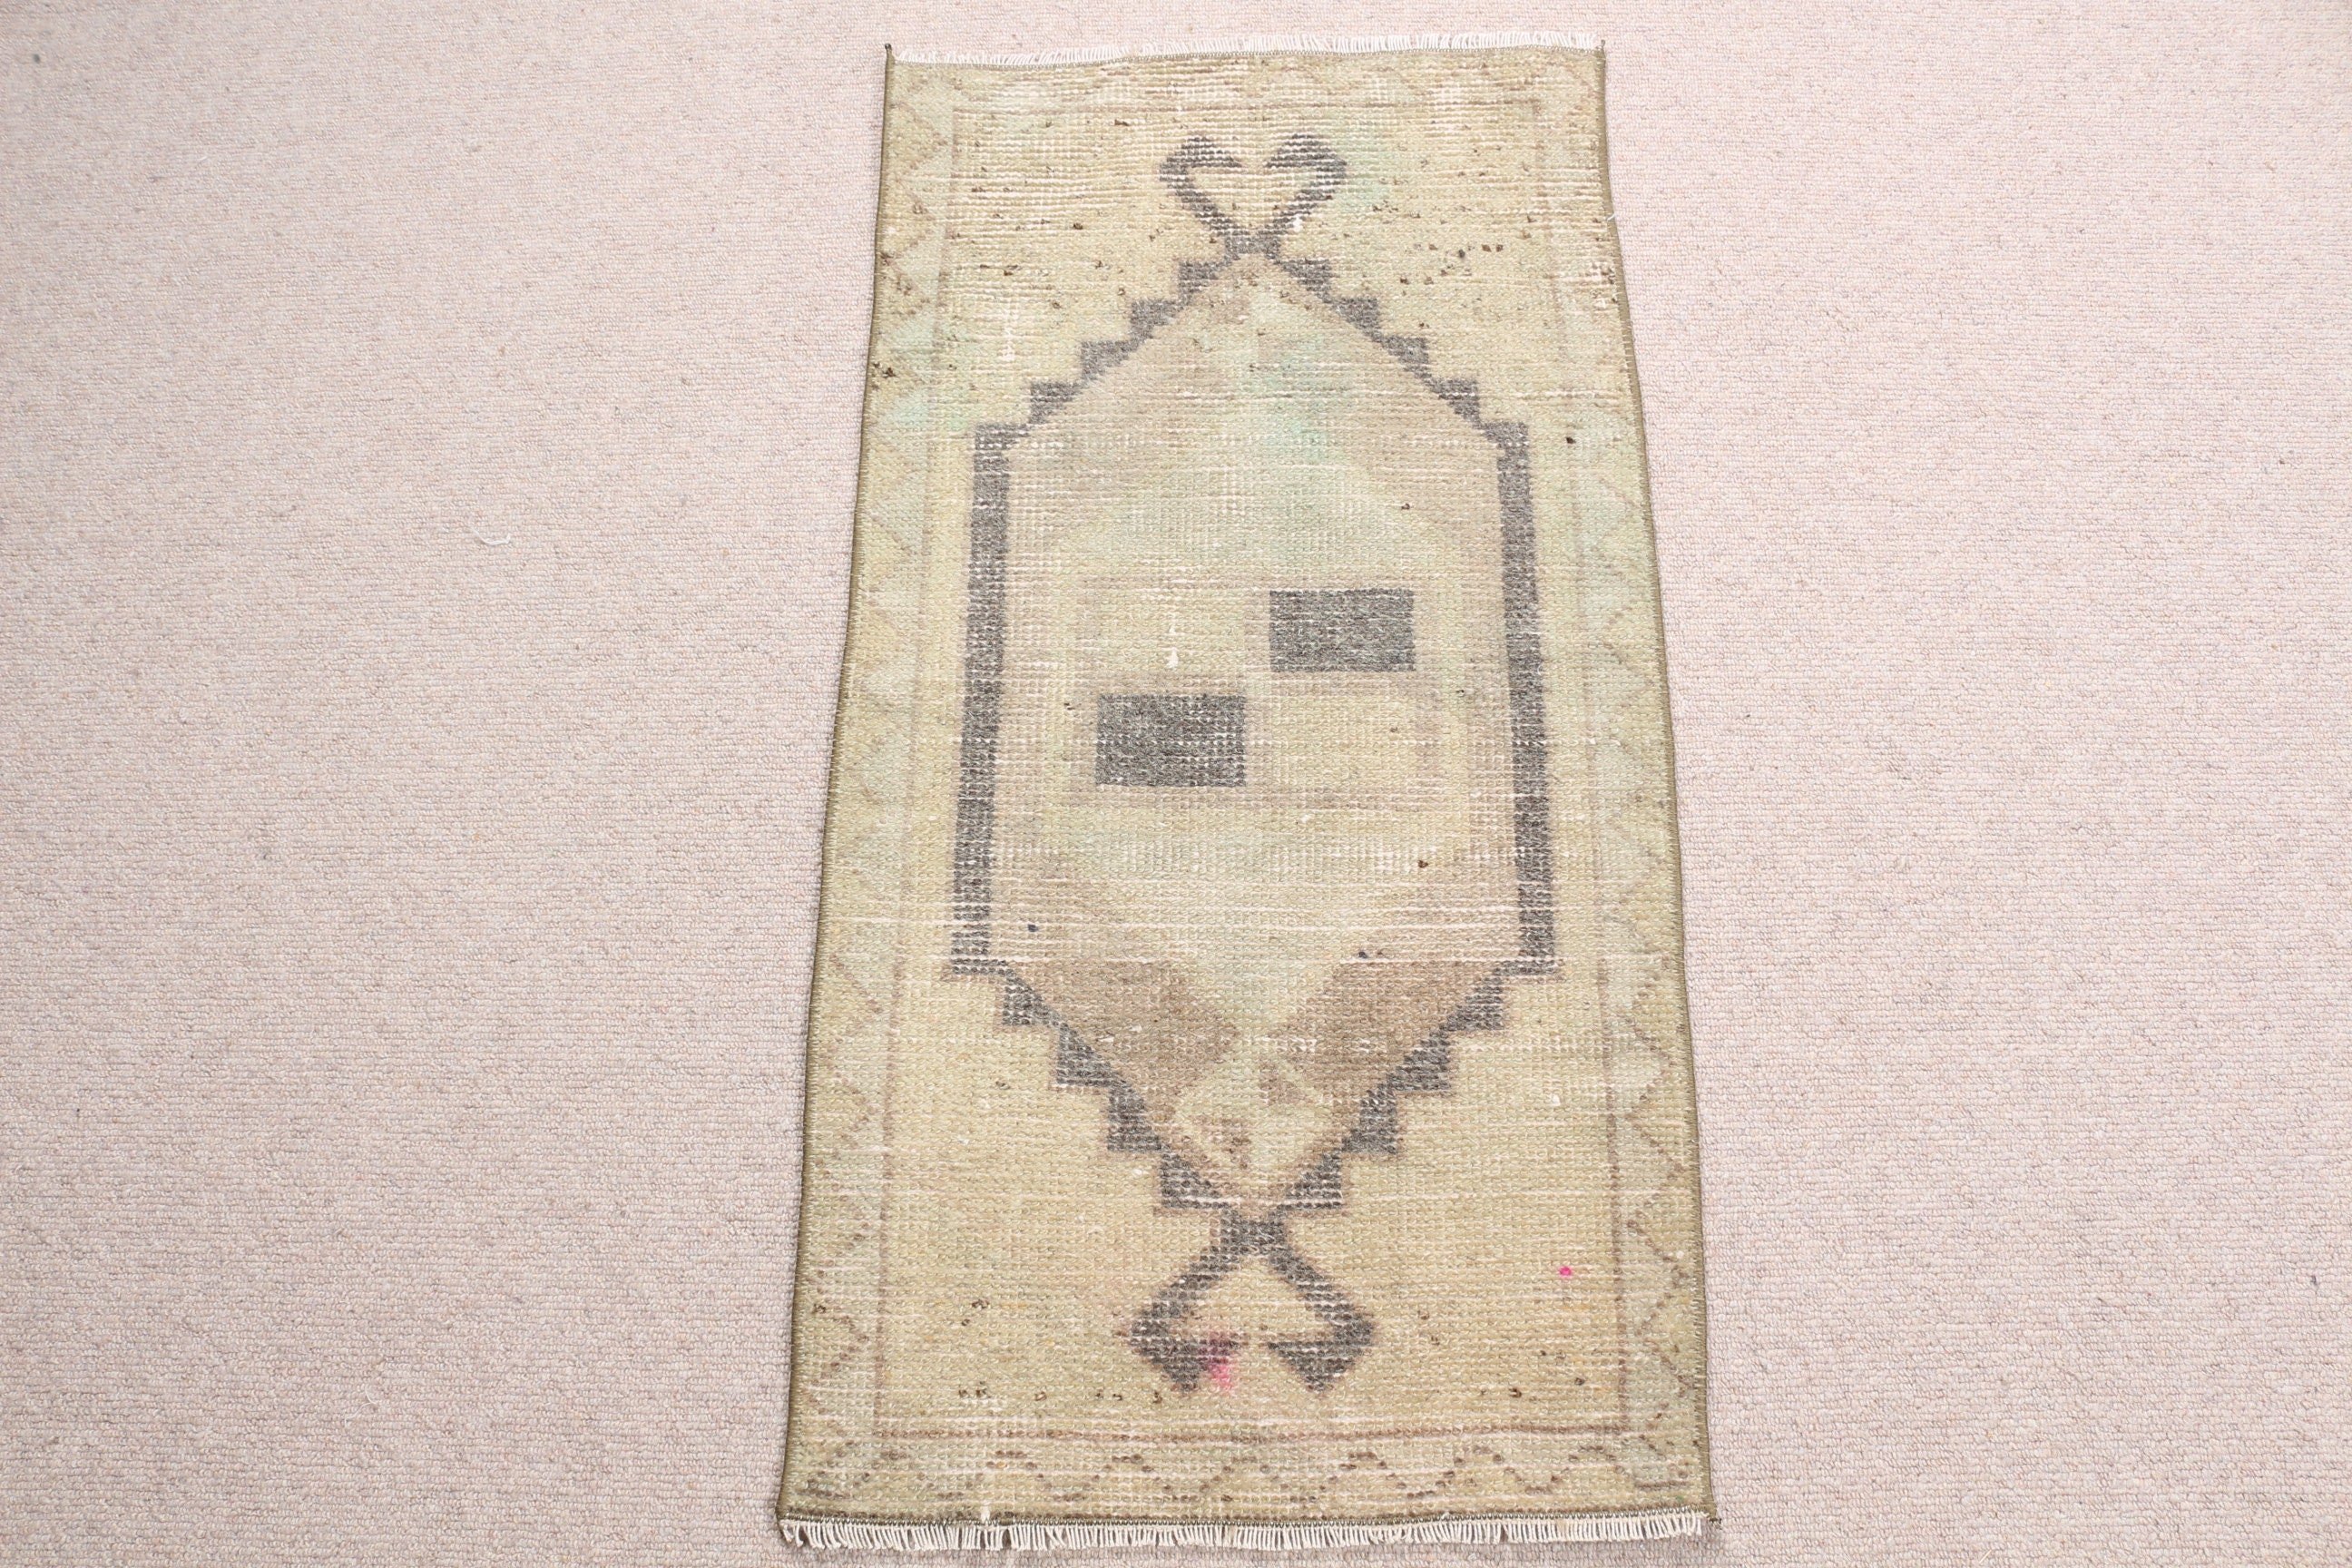 Vintage Rugs, Turkish Rugs, Moroccan Rug, Beige Kitchen Rug, Home Decor Rug, Hand Knotted Rug, 1.6x3.2 ft Small Rug, Car Mat Rugs, Bath Rug